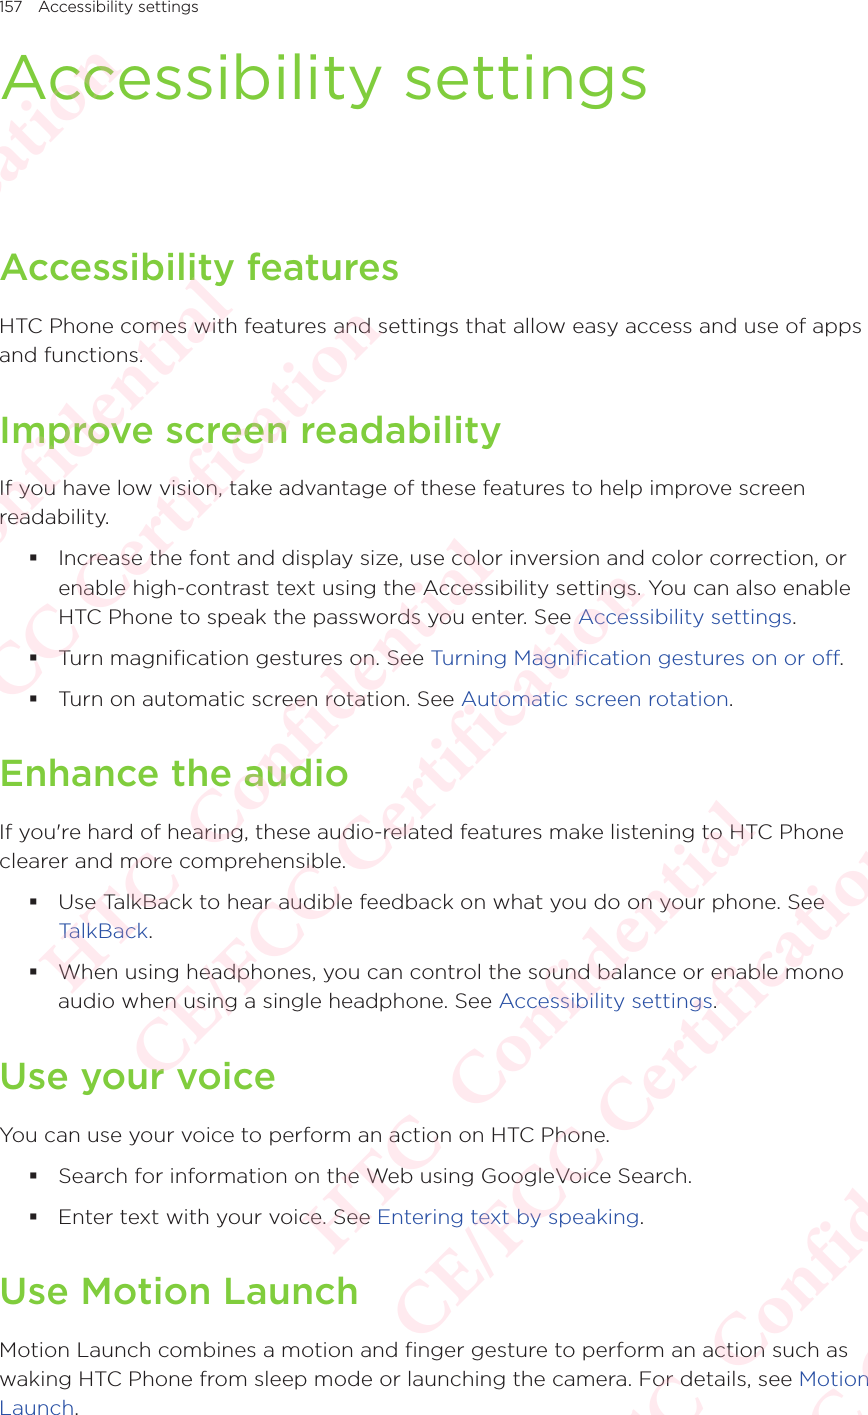 157 Accessibility settingsAccessibility settingsAccessibility featuresHTC Phone comes with features and settings that allow easy access and use of apps and functions. Improve screen readabilityIf you have low vision, take advantage of these features to help improve screen readability.  Increase the font and display size, use color inversion and color correction, or enable high-contrast text using the Accessibility settings. You can also enable HTC Phone to speak the passwords you enter. See Accessibility settings.  Turn magnification gestures on. See Turning Magnification gestures on or off.  Turn on automatic screen rotation. See Automatic screen rotation. Enhance the audioIf you&apos;re hard of hearing, these audio-related features make listening to HTC Phone clearer and more comprehensible. Use TalkBack to hear audible feedback on what you do on your phone. See  TalkBack. When using headphones, you can control the sound balance or enable mono audio when using a single headphone. See Accessibility settings.Use your voiceYou can use your voice to perform an action on HTC Phone.  Search for information on the Web using GoogleVoice Search.  Enter text with your voice. See Entering text by speaking. Use Motion LaunchMotion Launch combines a motion and finger gesture to perform an action such as waking HTC Phone from sleep mode or launching the camera. For details, see Motion Launch. HTC  Confidential CE/FCC Certification  HTC  Confidential CE/FCC Certification  HTC  Confidential CE/FCC Certification  HTC  Confidential CE/FCC Certification  HTC  Confidential CE/FCC Certification 